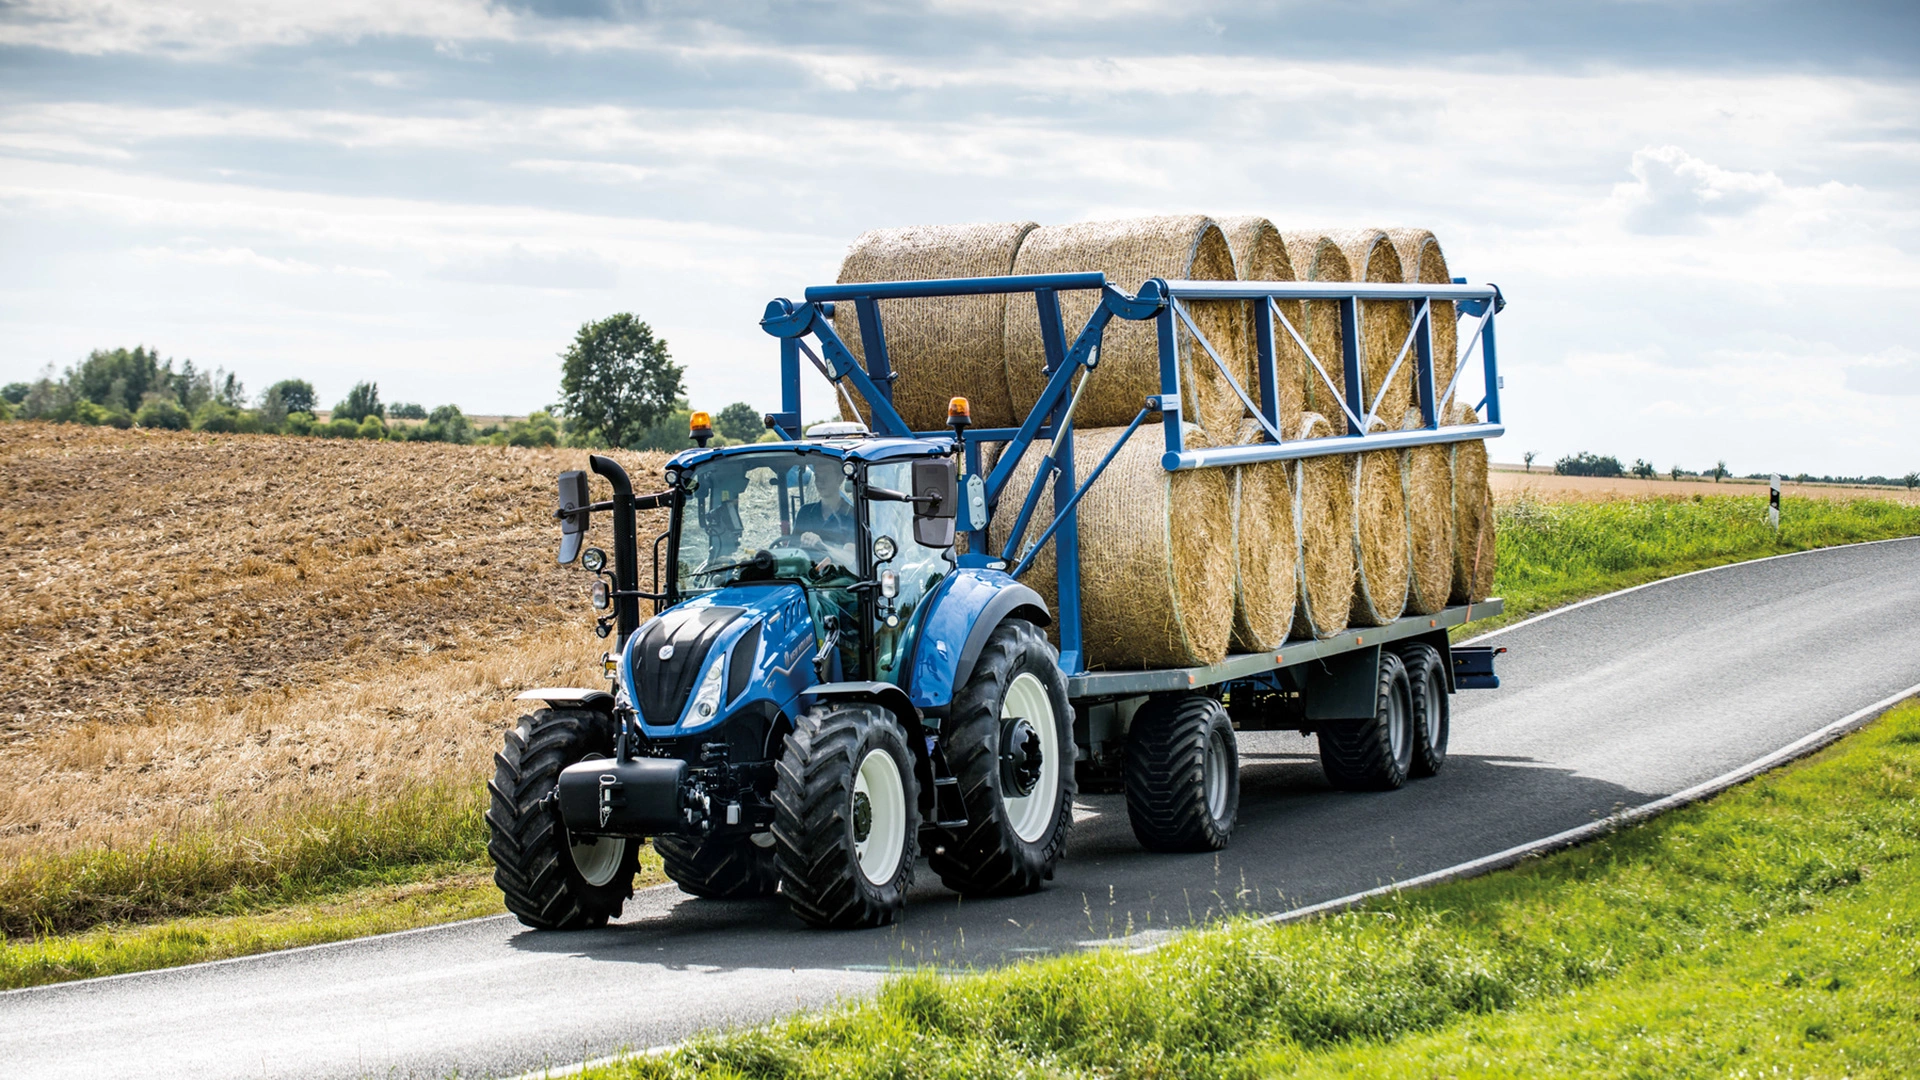 New Holland T5 Electro Command tractor in motion, transporting agricultural supplies